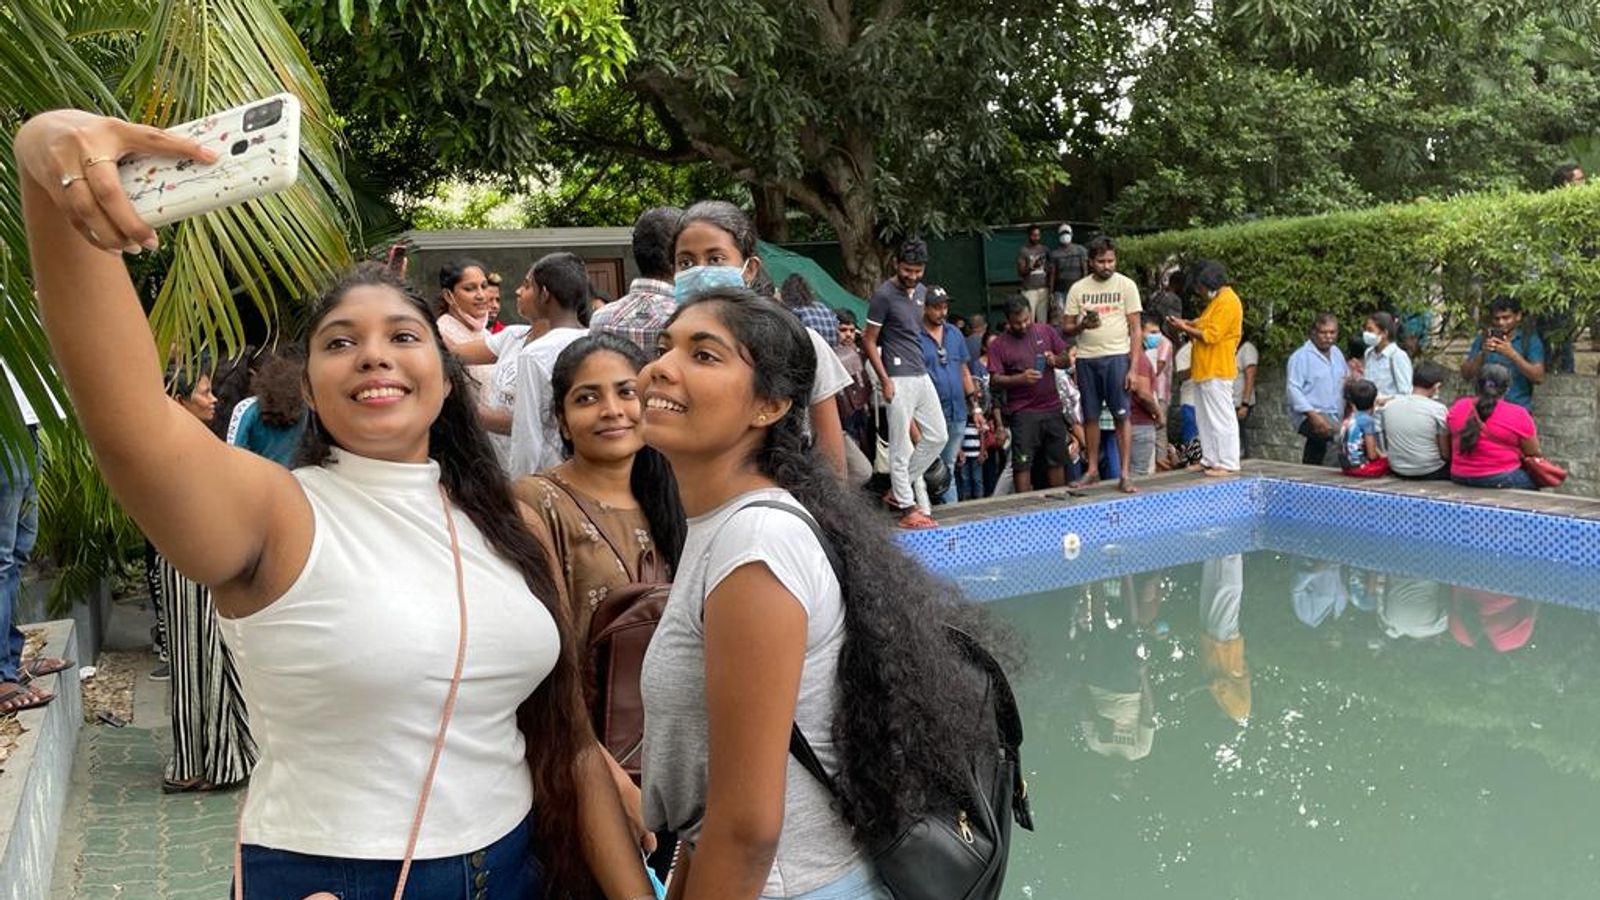 Selfies, picnics, board games: Inside Sri Lanka's presidential palace day after it was stormed by protesters